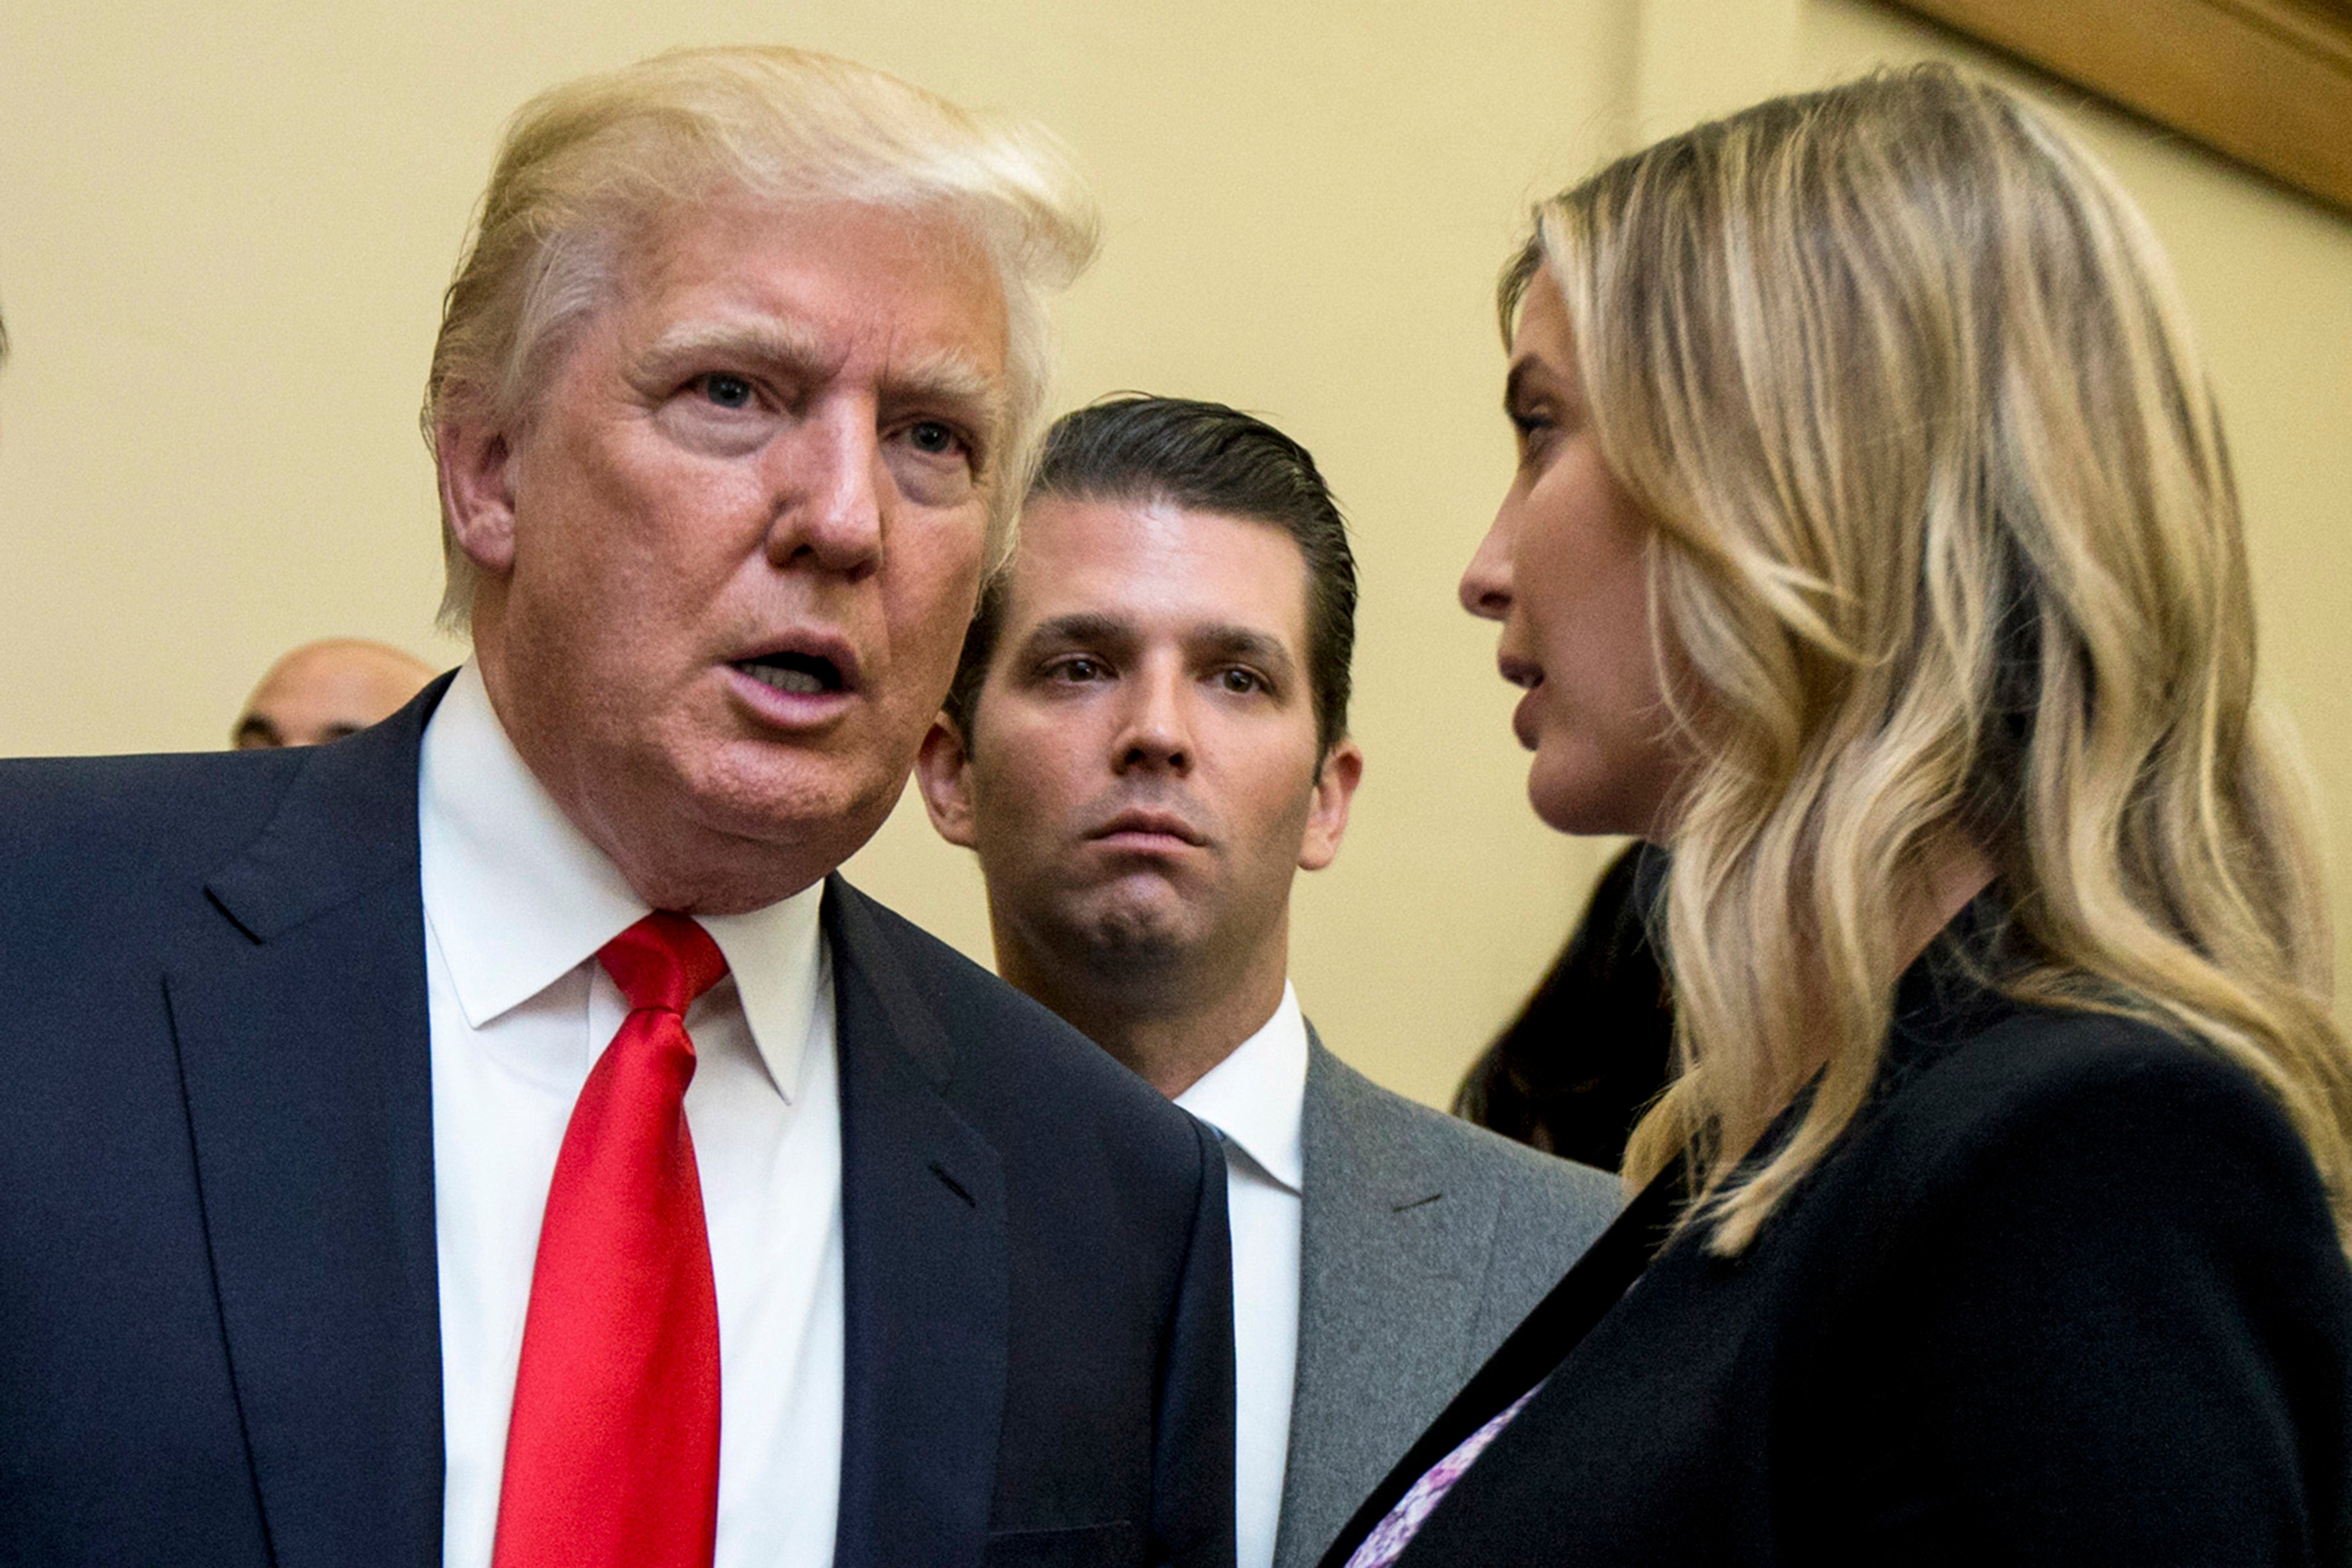 Donald Trump has claimed he asked daughter Ivanka not to be part of his 2024 campaign